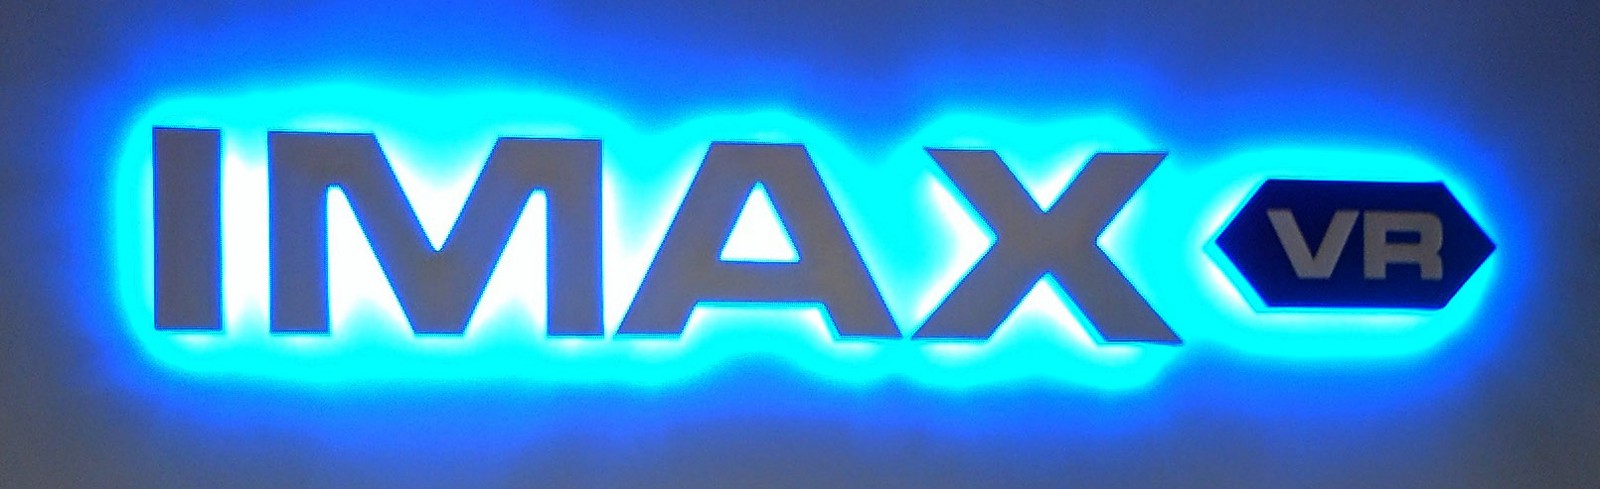 A depiction of the IMAX VR logo from the famous IMAX organization, from the article for video game composers by Winifred Phillips (game music composer).